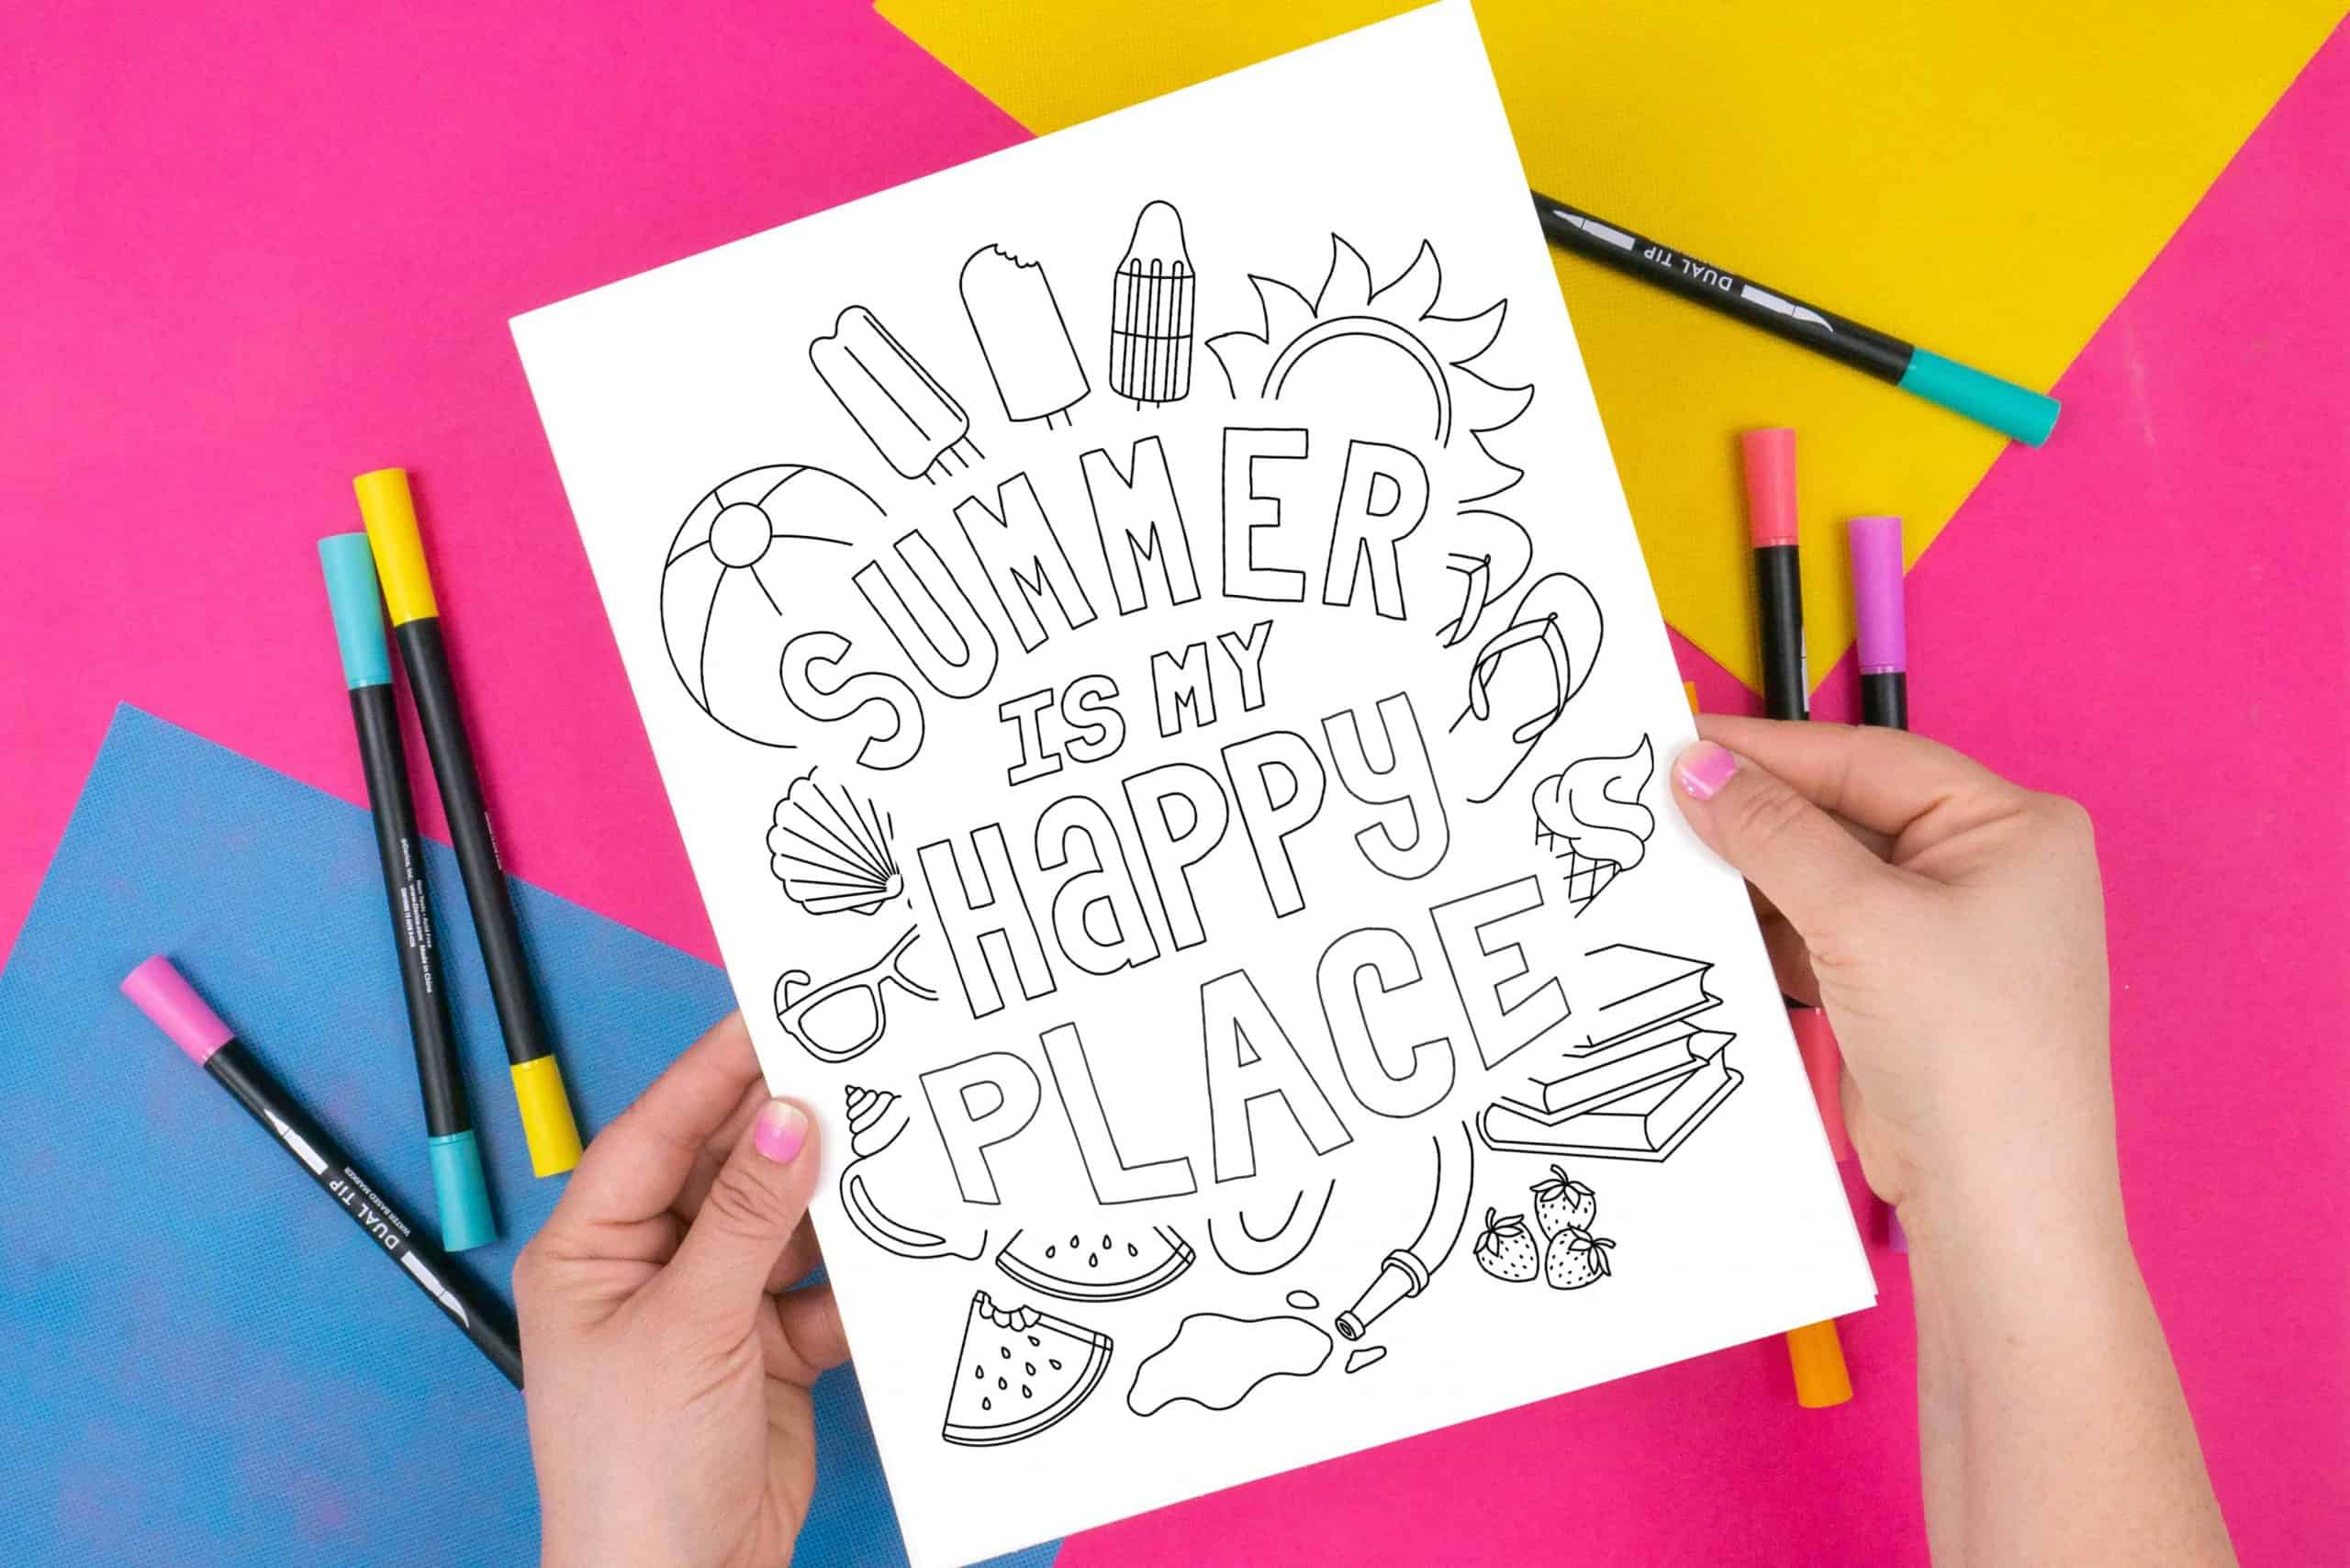 Hands holding Summer Happy Place Free coloring page on a pink background with markers.